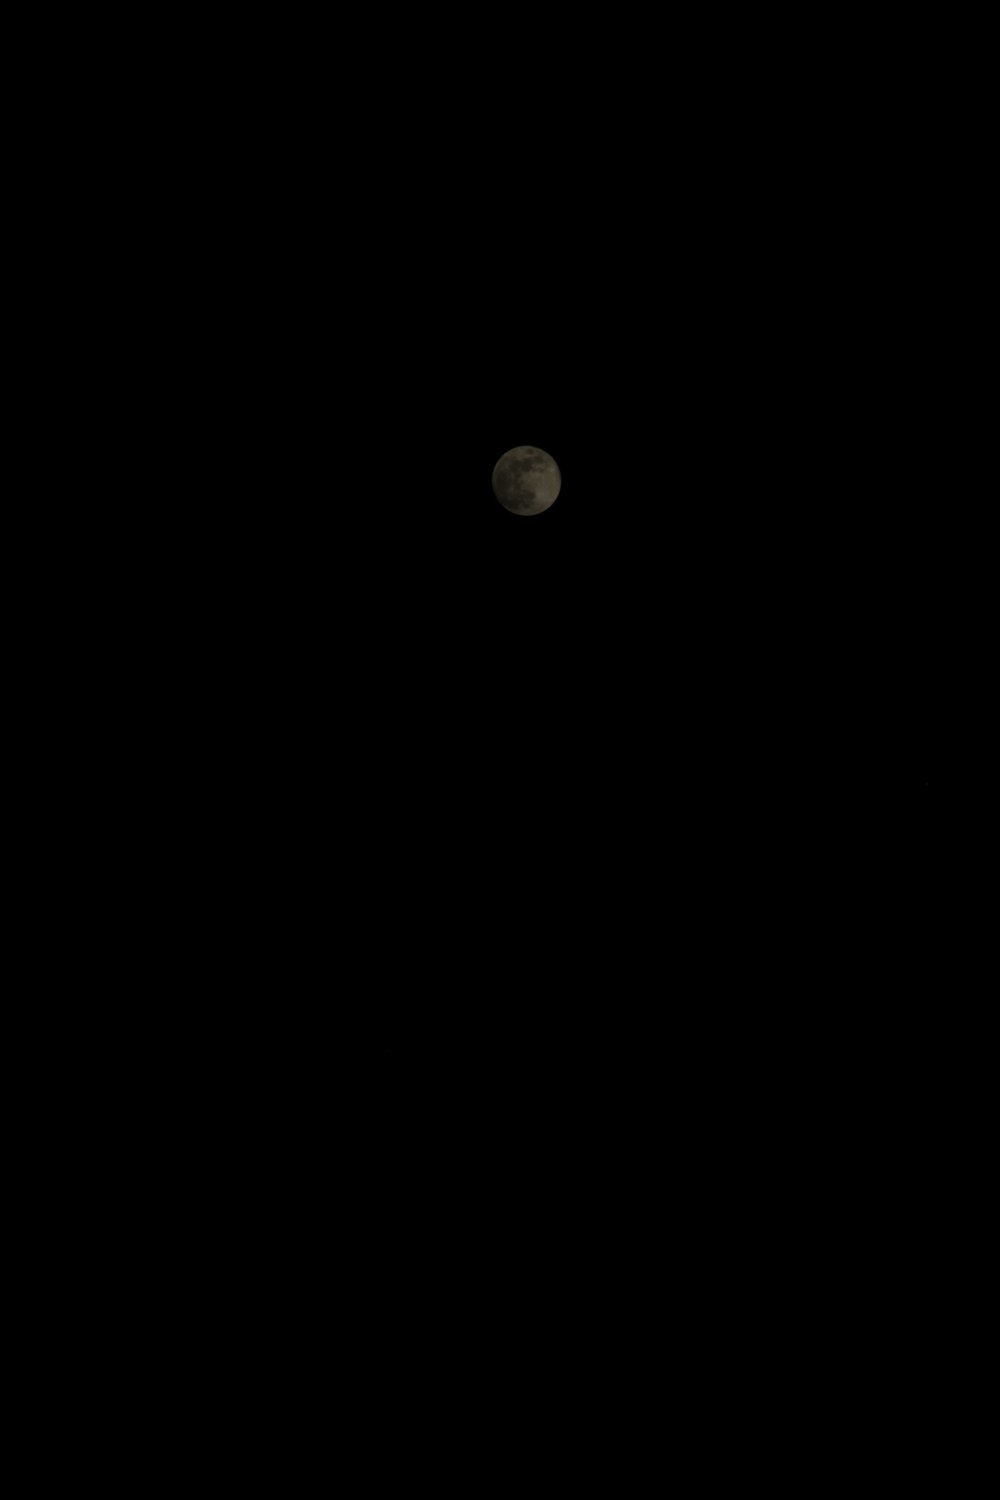 the moon is visible in the dark sky